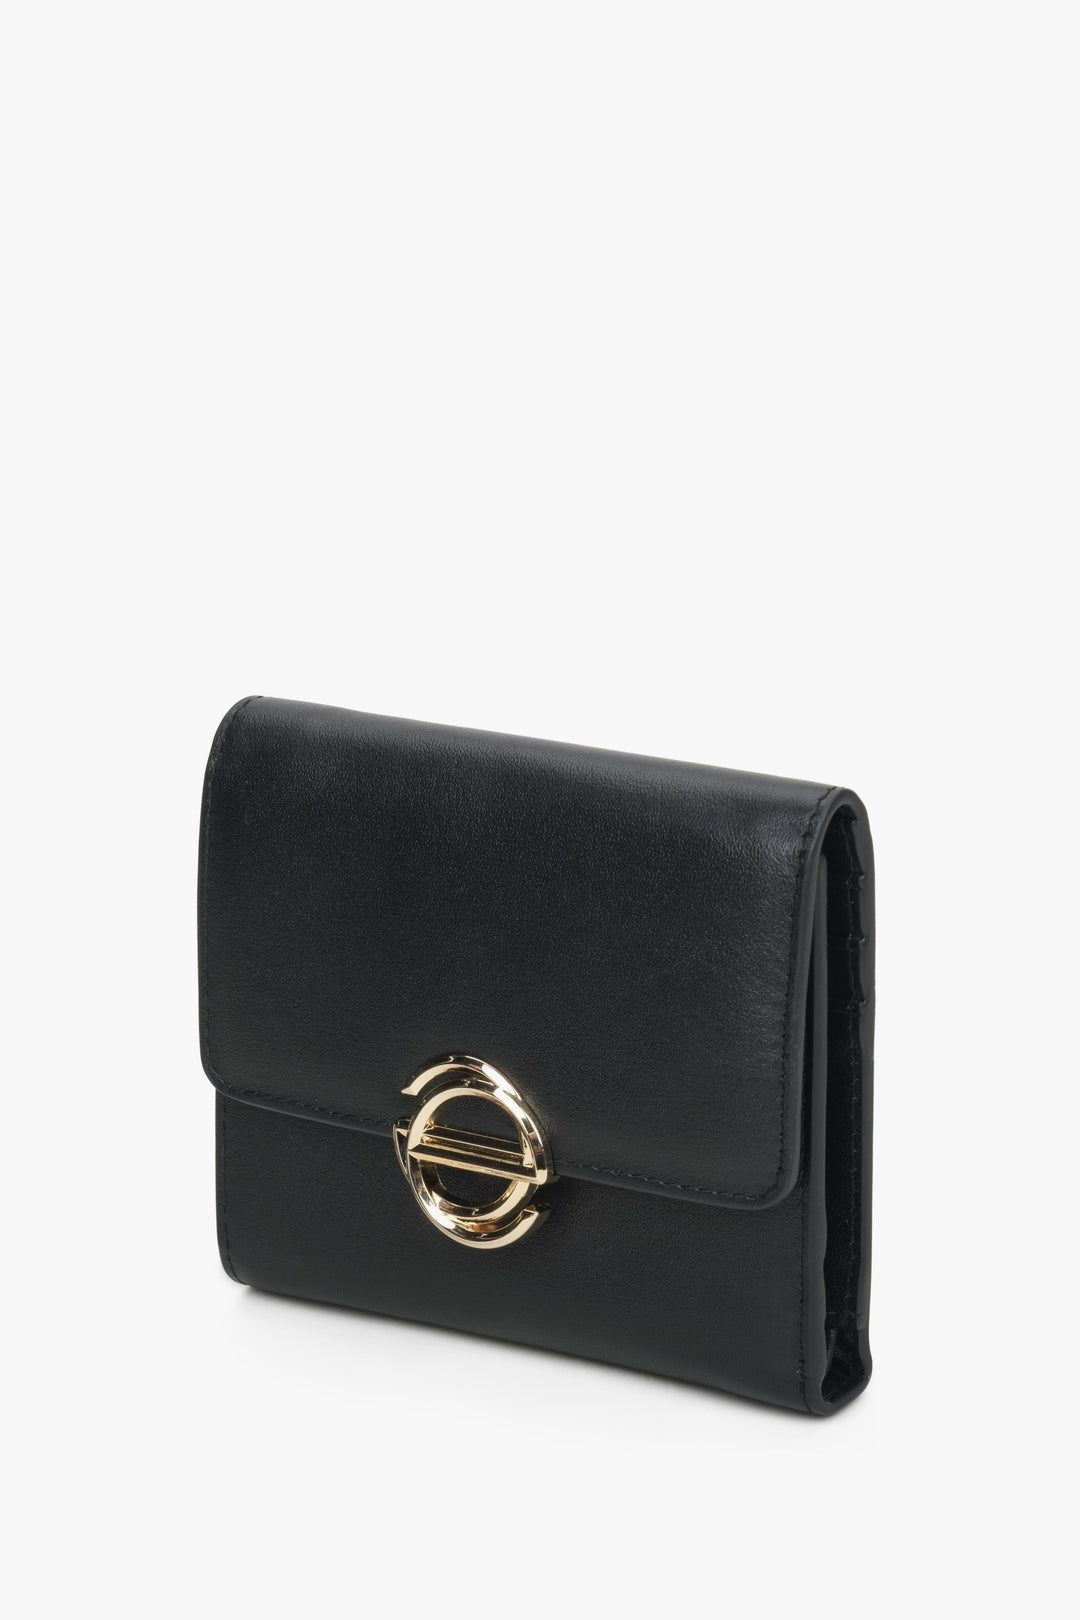 Women's small black wallet made of genuine Leather with golden embellishments by Estro.